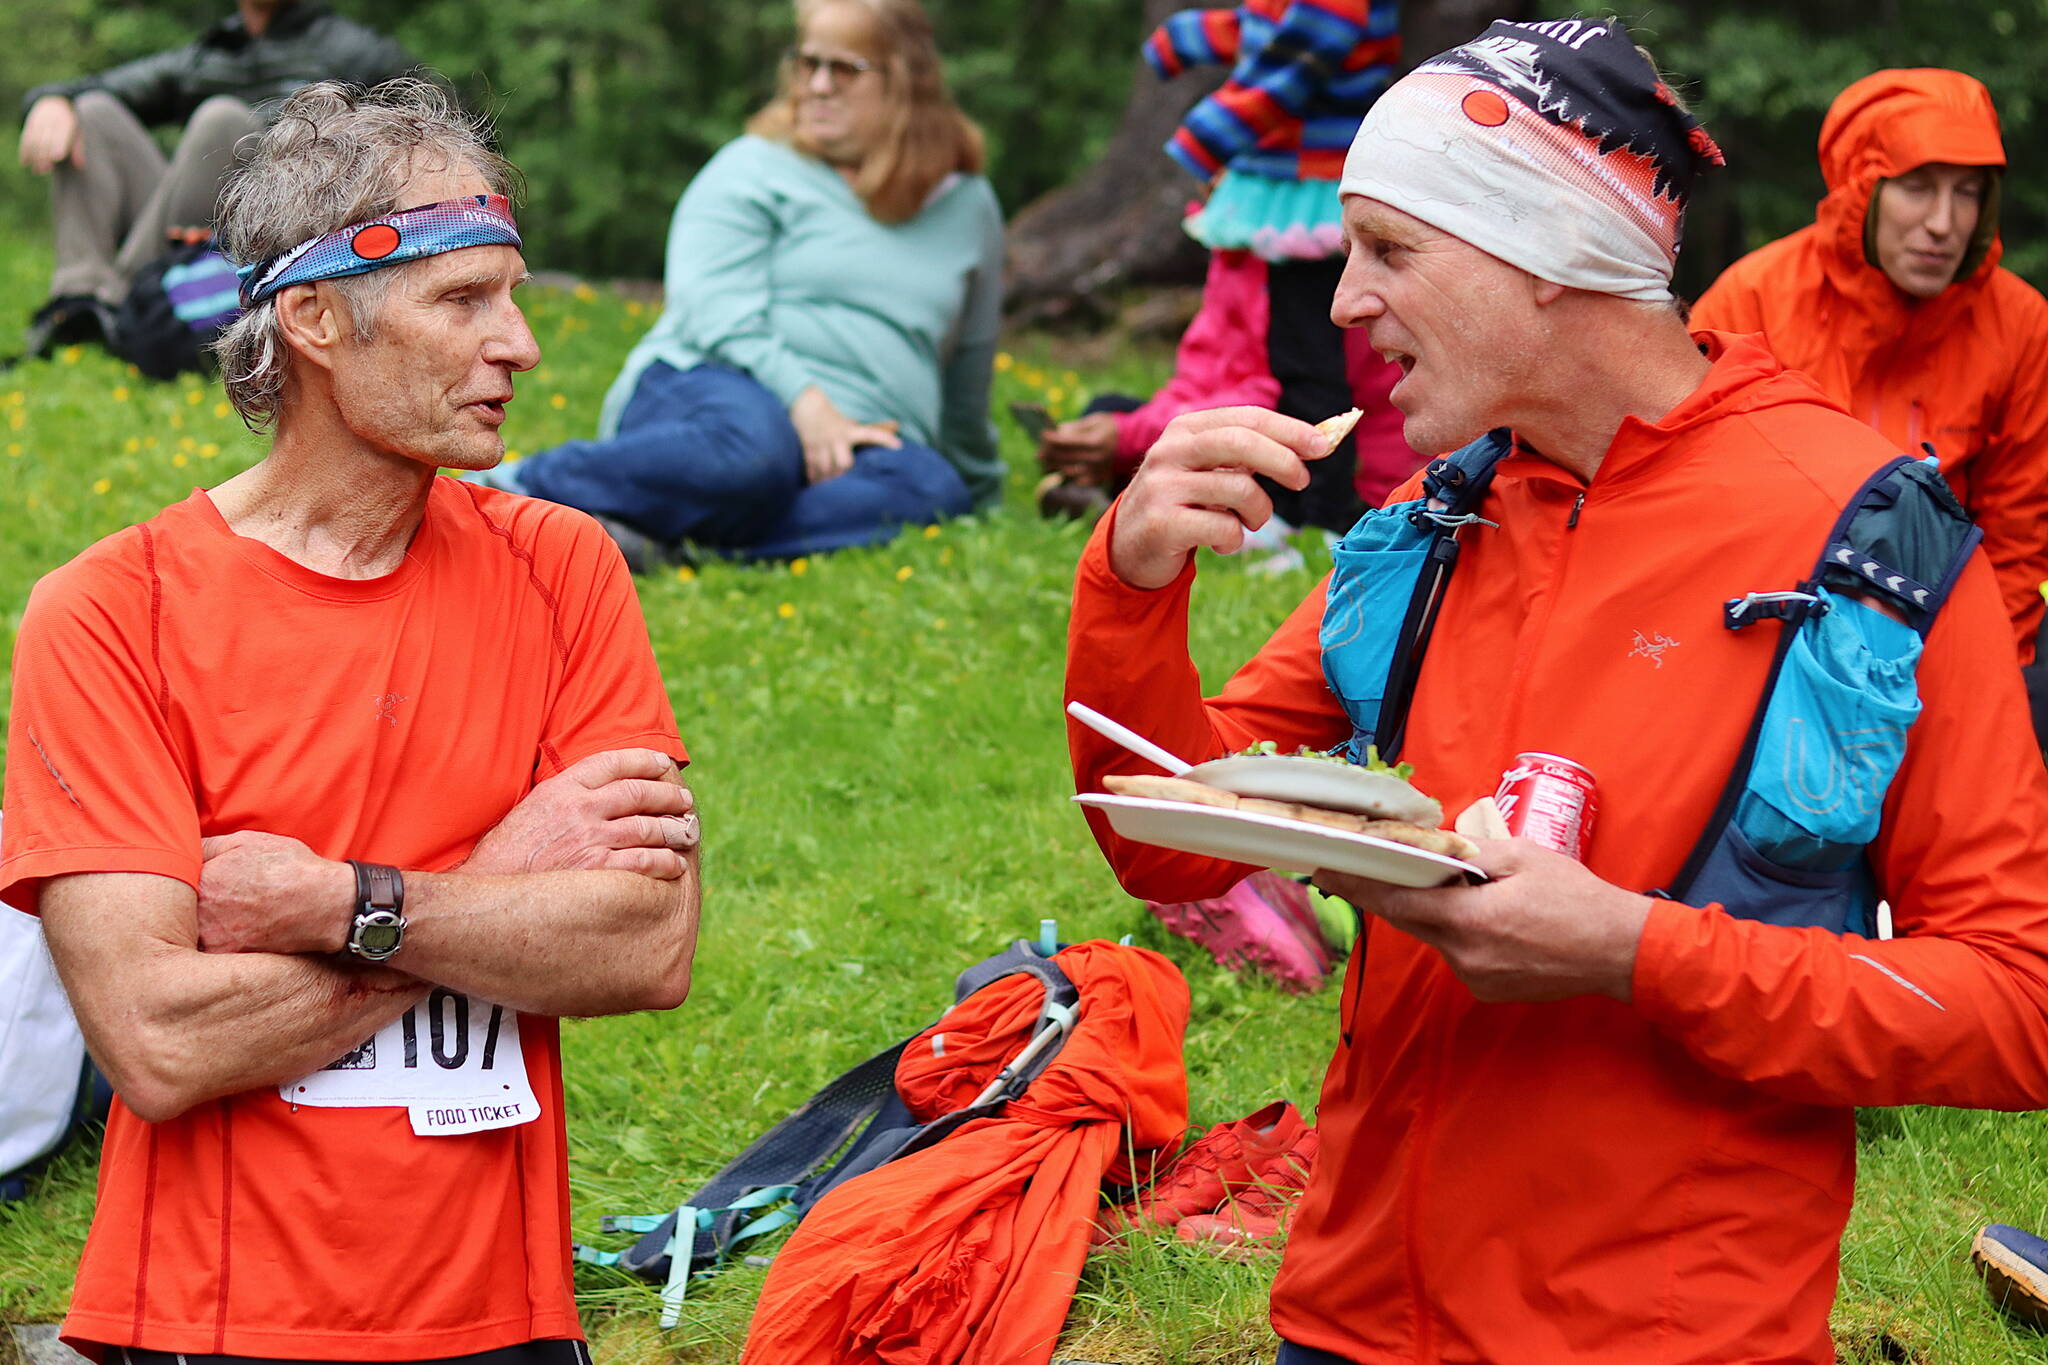 Alex Andrews, right, refuels with pizza and salad while talking with Dan Rondeau after the Juneau Ridge Race at Cope Park on Sunday. (Mark Sabbatini / Juneau Empire)